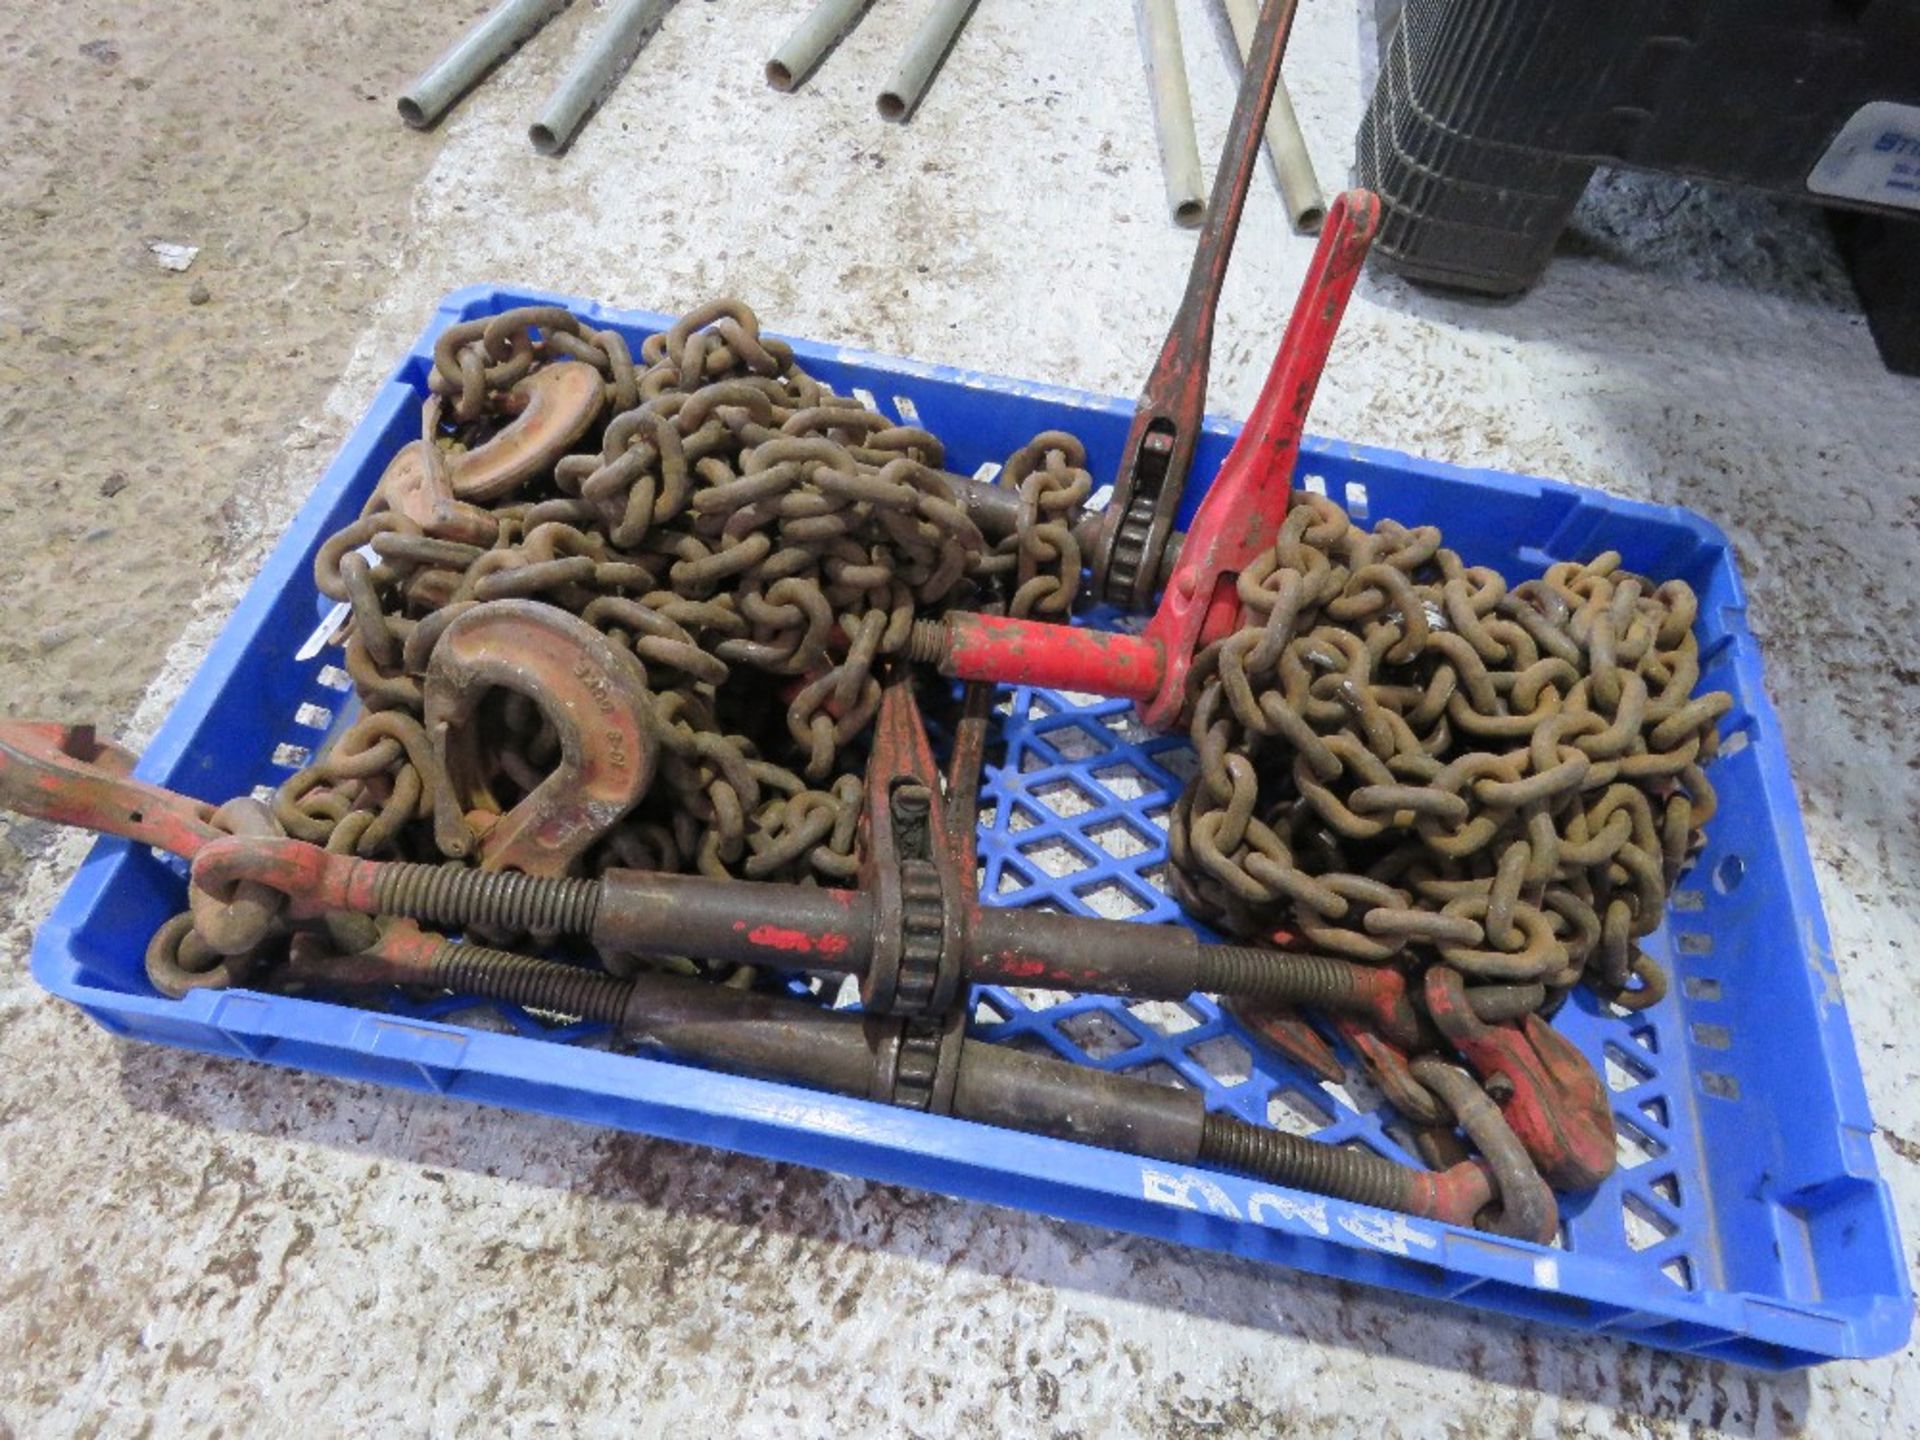 3NO LOAD SECURING TIE DOWN CHAINS PLUS 4NO RATCHET TIGHTENERS. SOURCED FROM COMPANY LIQUIDATION. - Bild 2 aus 2